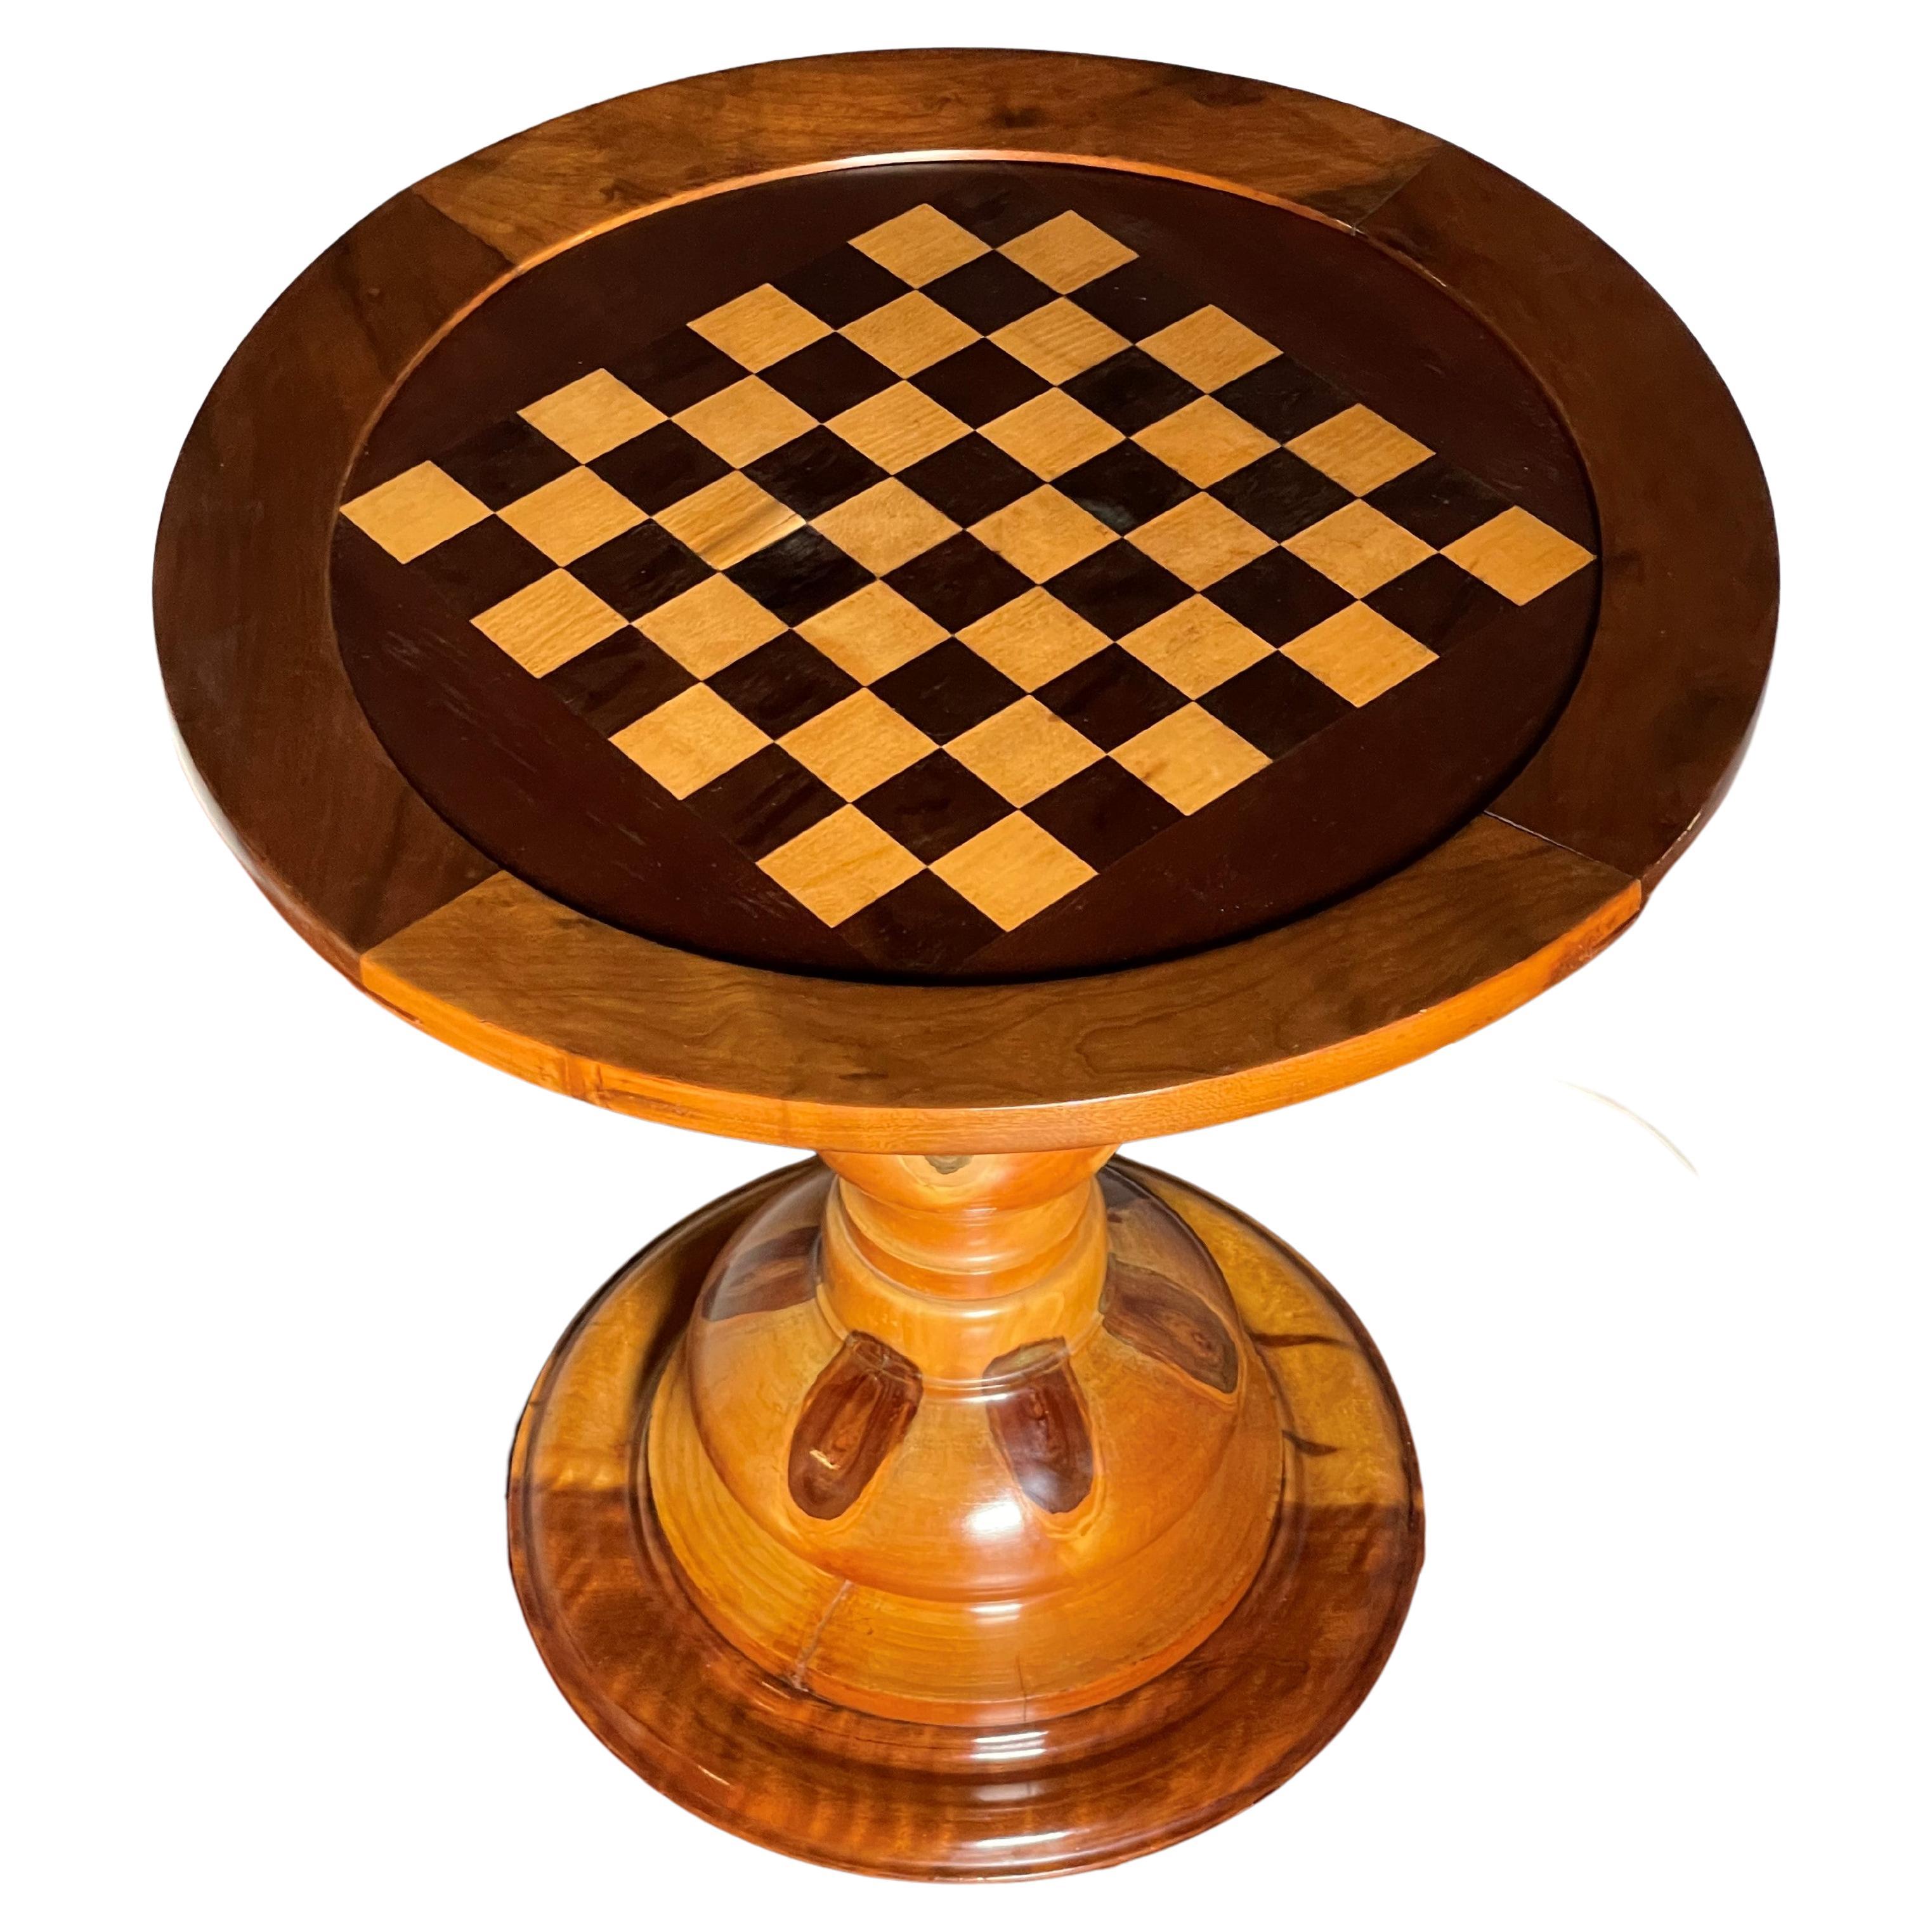 Mid-Century Modern Chess Table of Wood with Stunning Tree Knots Pattern & Light